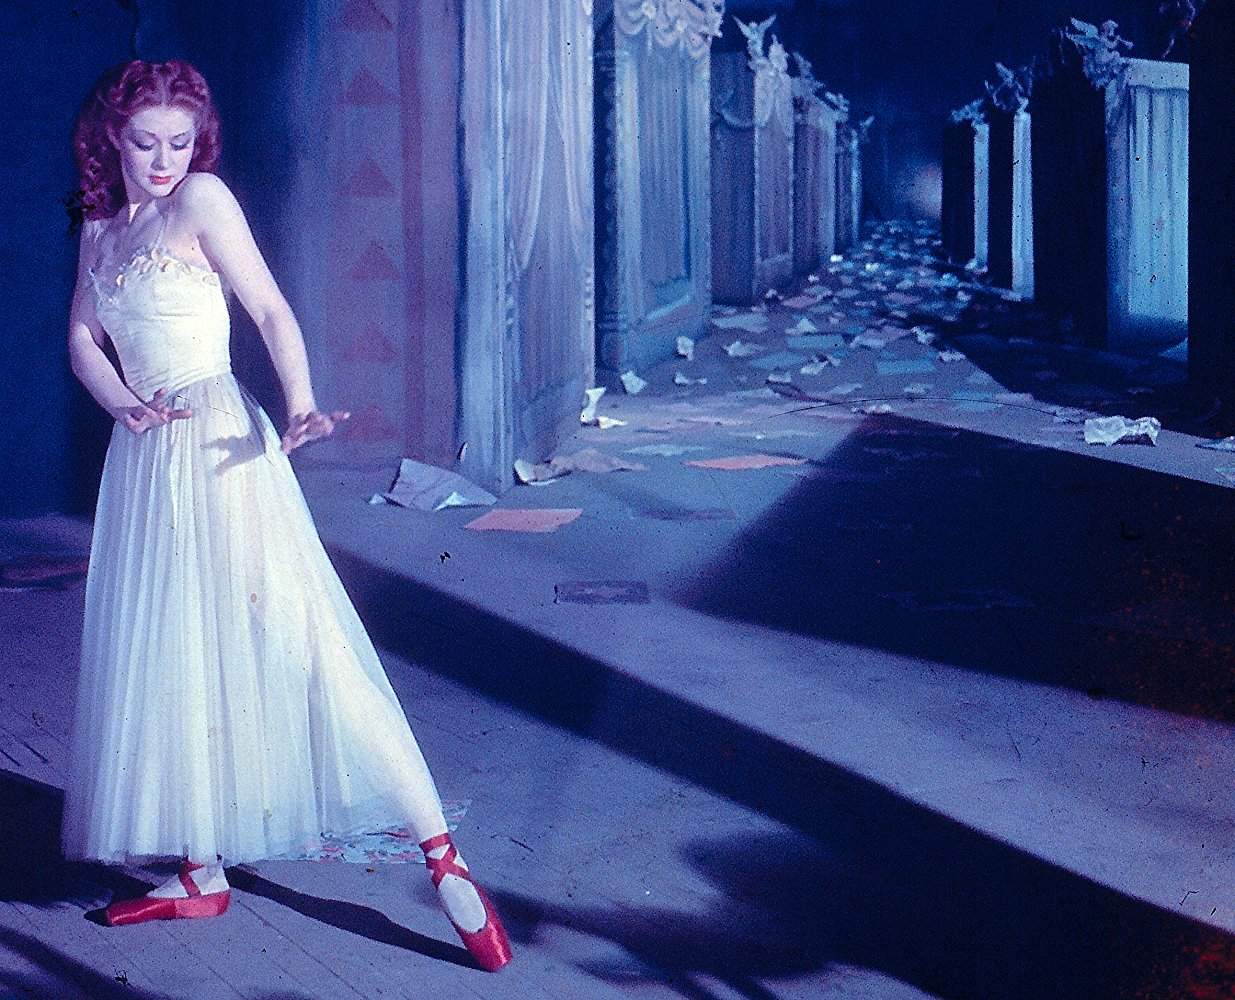 The Red Shoes Movie Essay - 1948 Film by Michael Powell and Emeric Pressburger